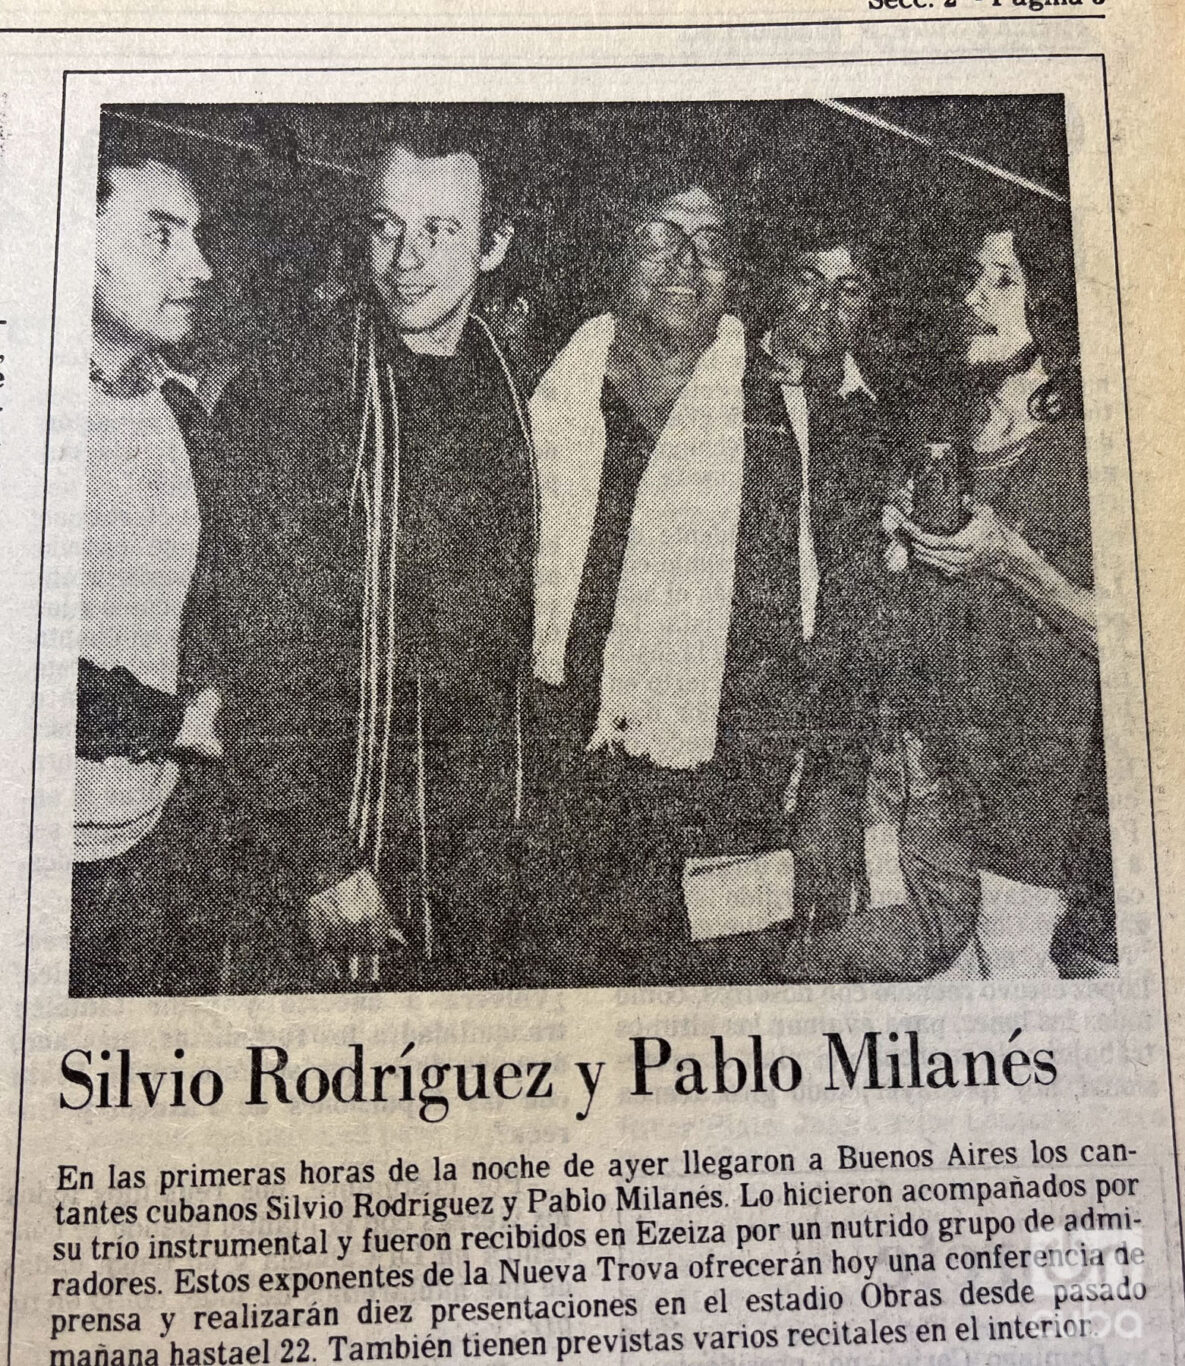 Announcement in the newspaper Cónica on the arrival of Silvio and Pablo to Argentina.